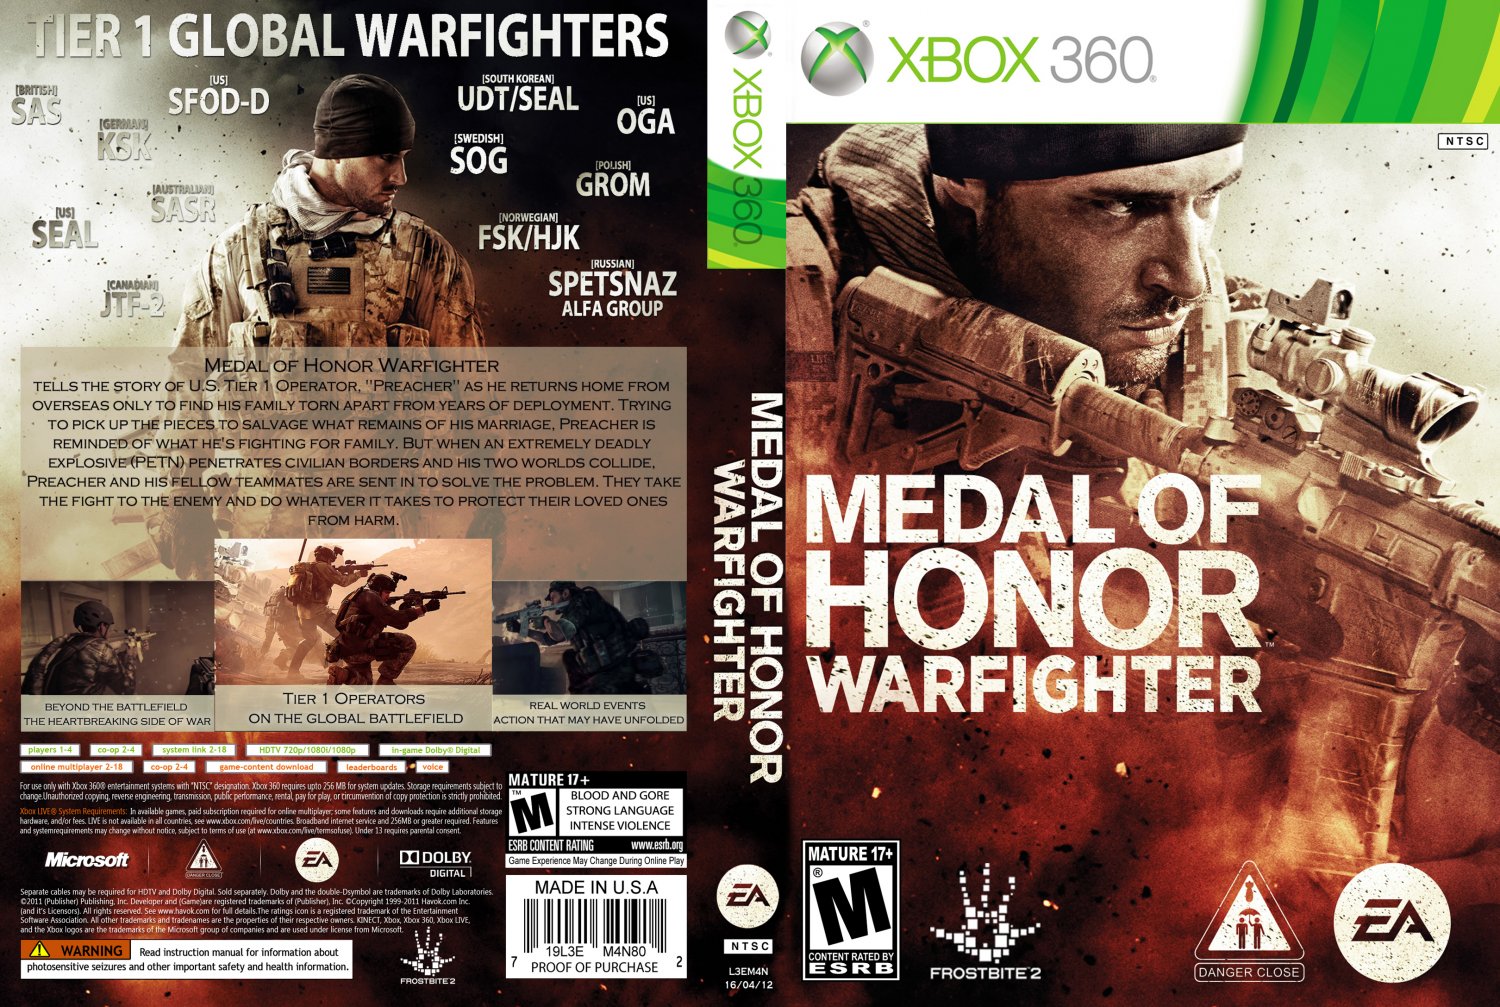 Medal of honor 360. Игра Medal of Honor. Medal of Honor Warfighter Xbox 360. Medal of Honor Warfighter Xbox 360 Disk. Xbox 360 обложка диска Medal of Honor Warfighter.